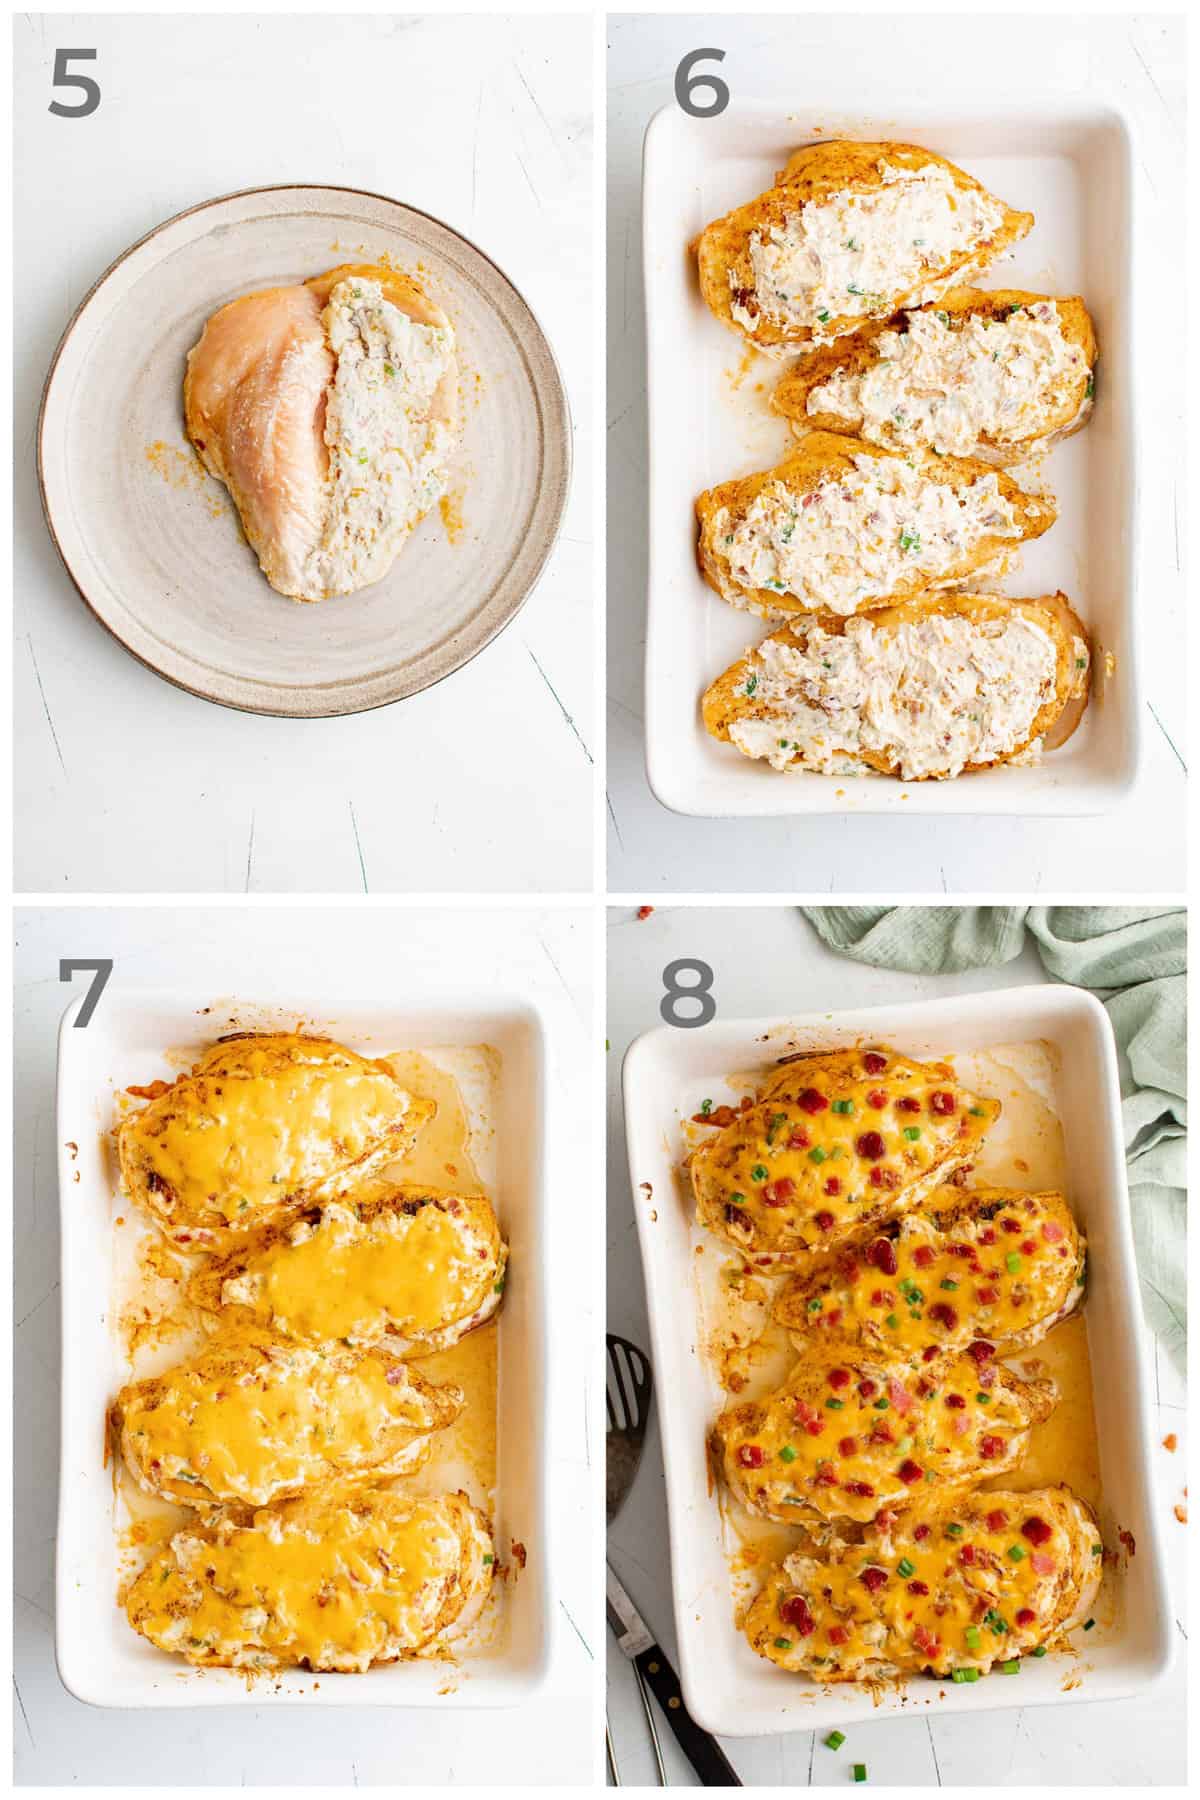 Step by step photo instructions for how to make cheesy bacon ranch chicken.